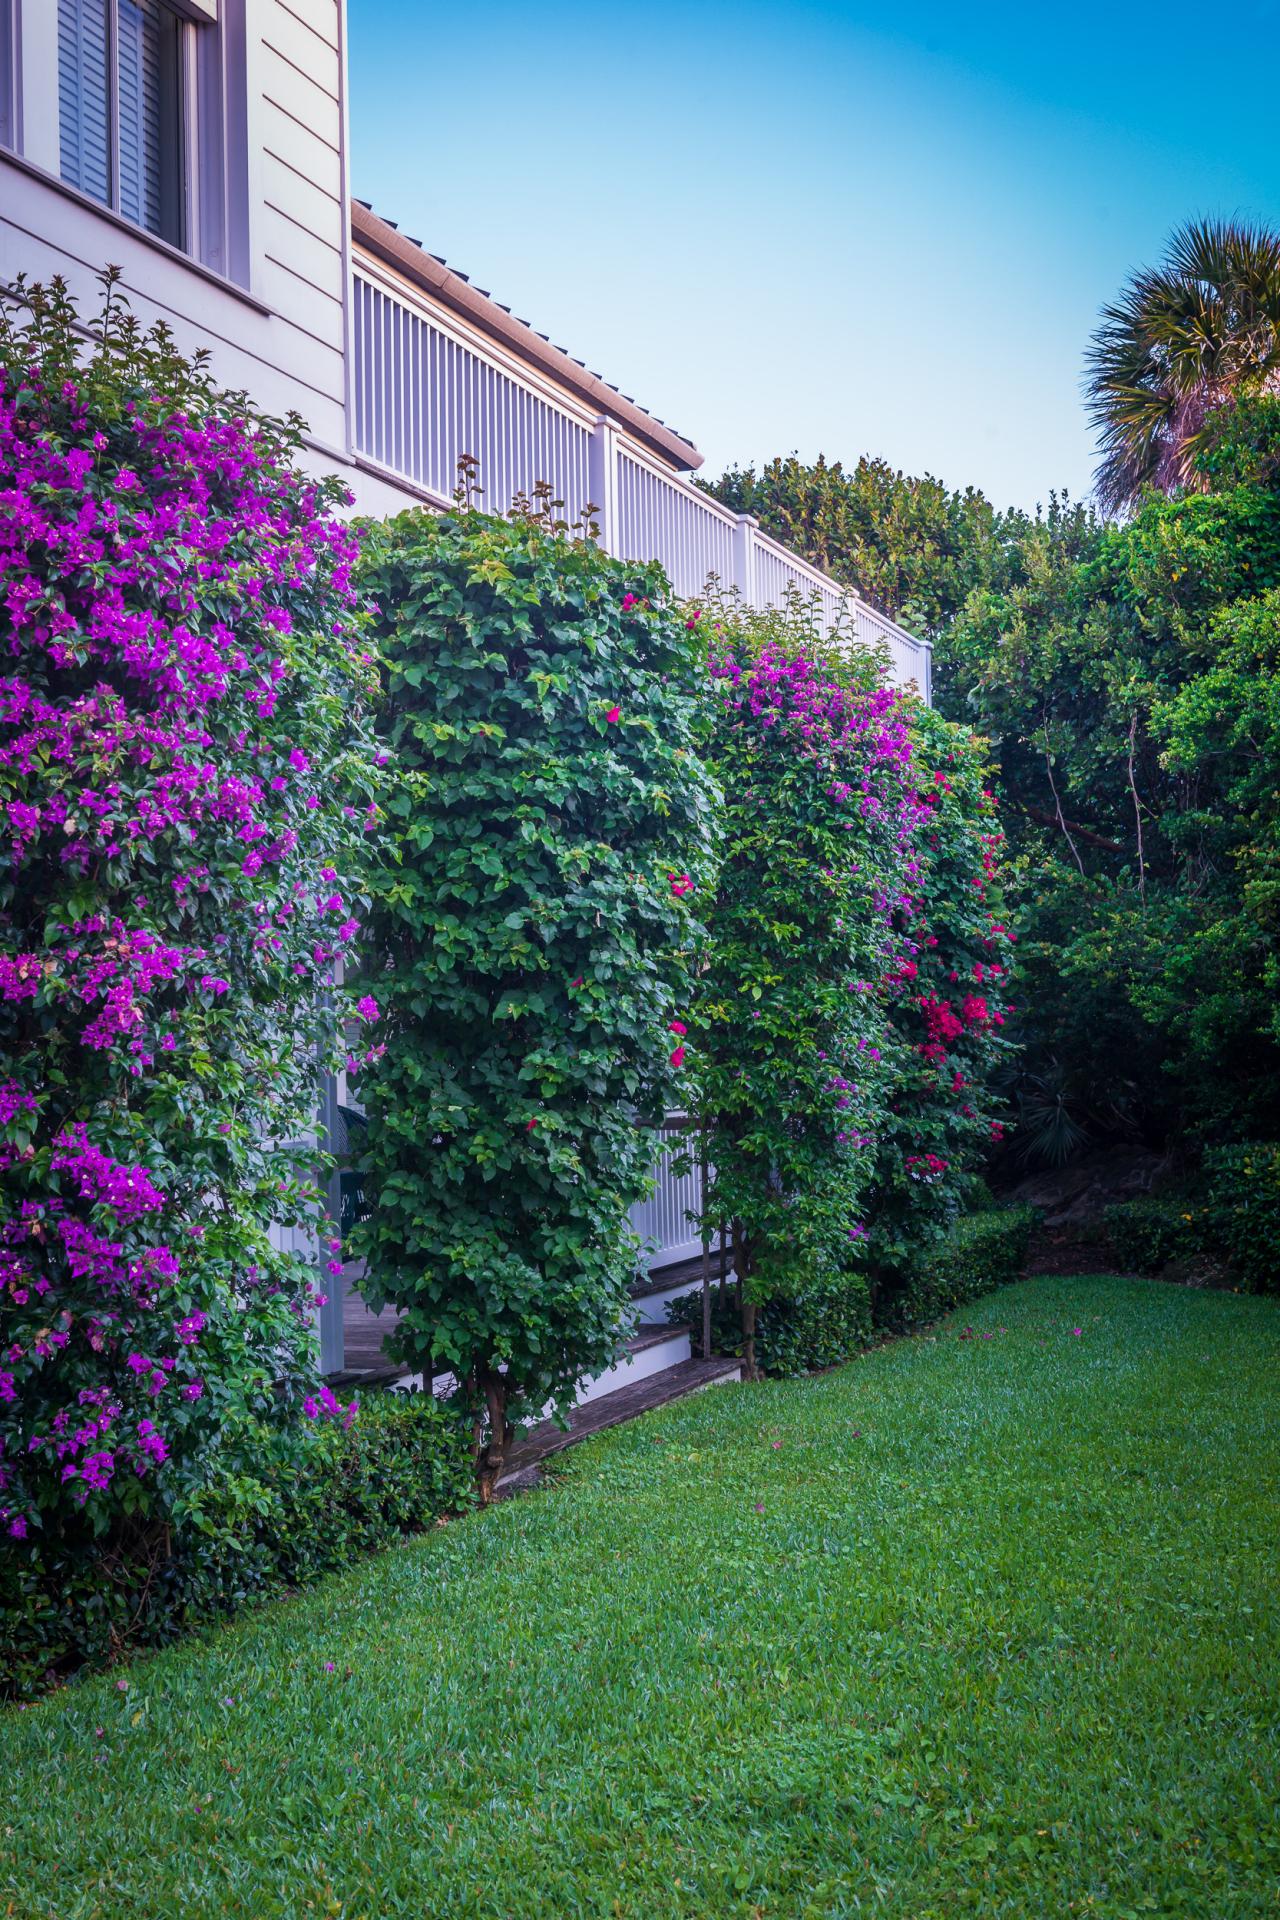 Bougainvillea: How to Plant, Grow Care for Bougainvillea | HGTV